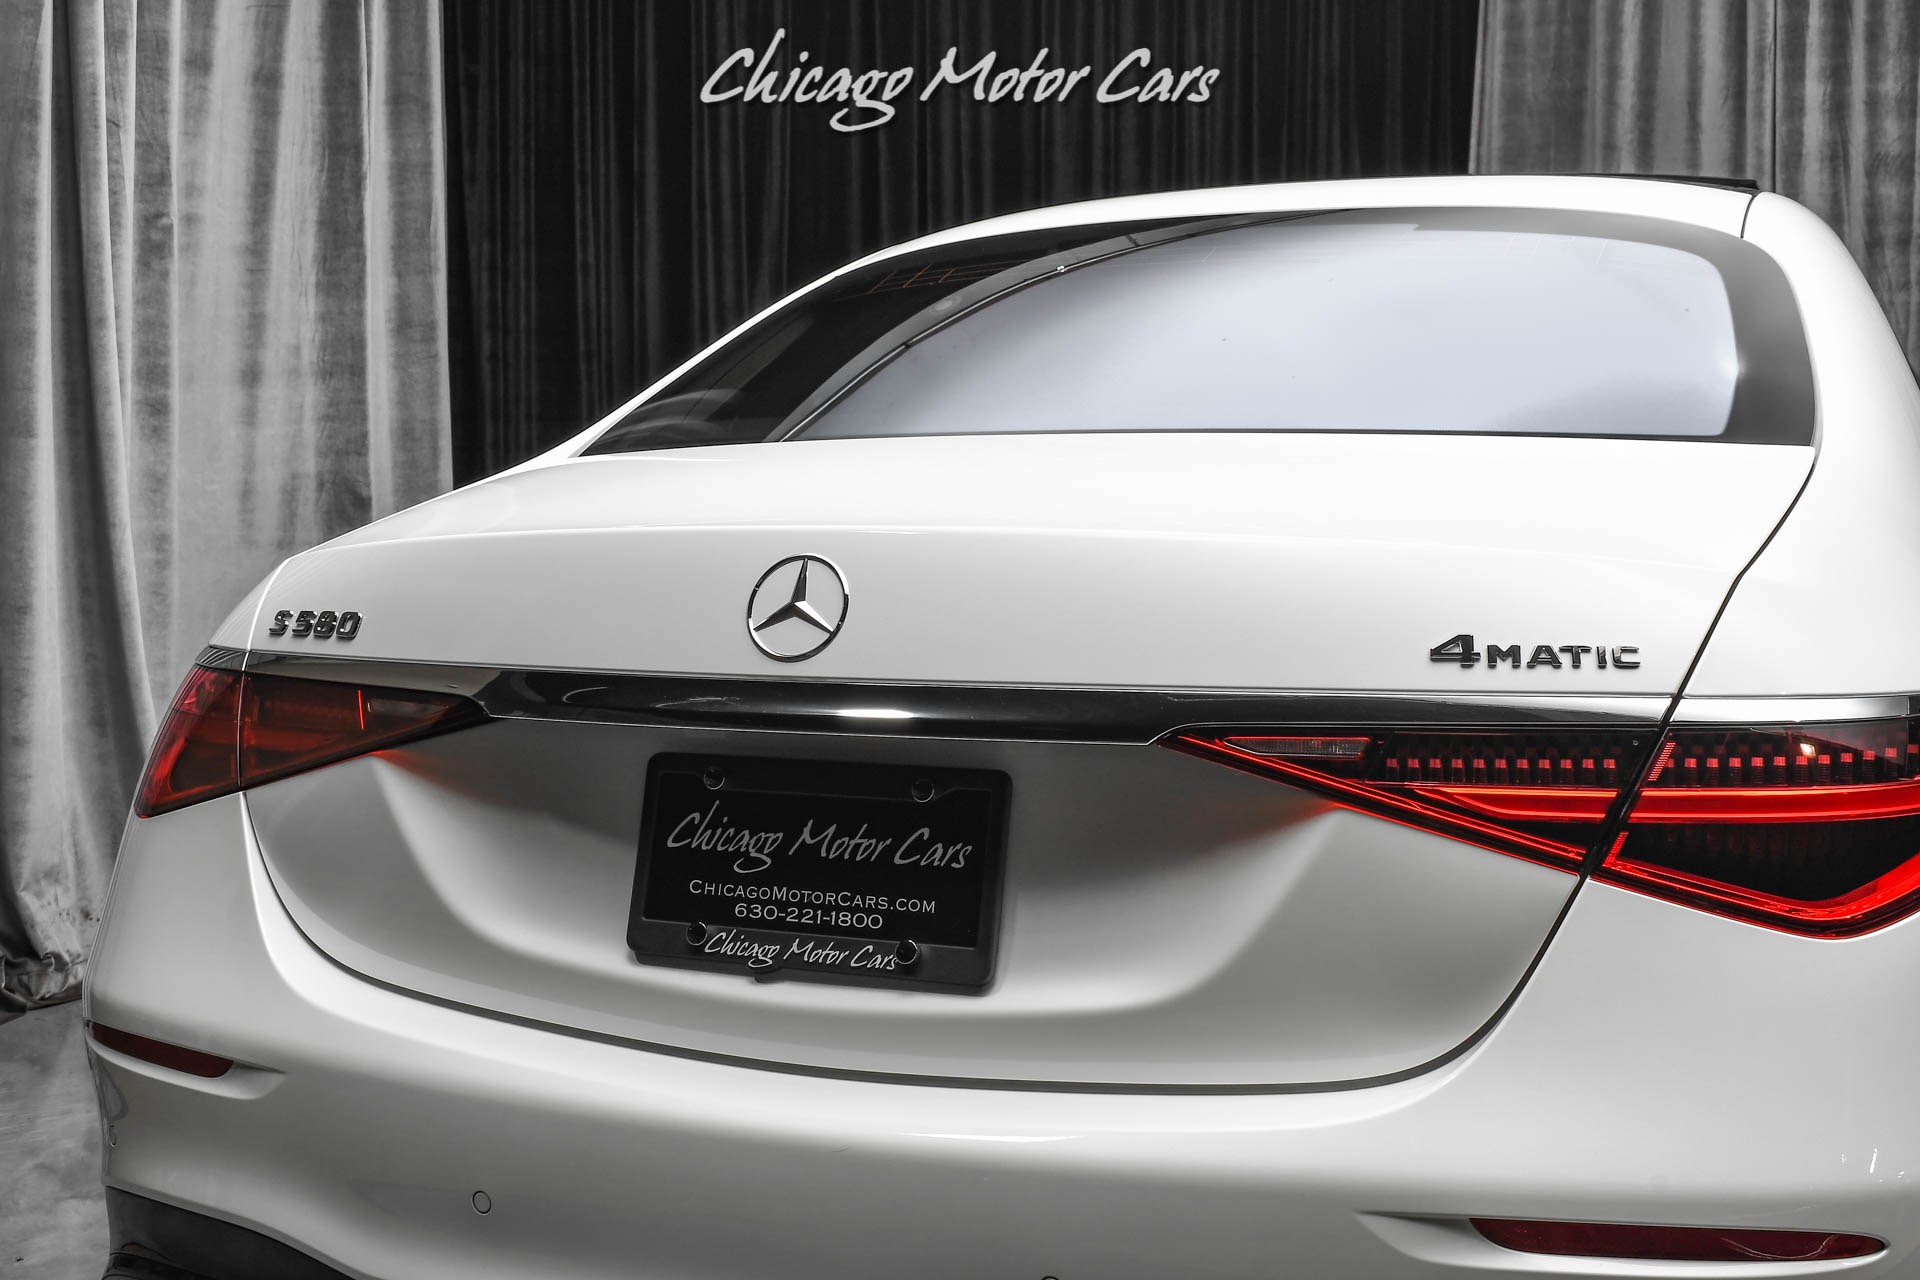 Used-2021-Mercedes-Benz-S580-4-Matic-Sedan-AMG-Line-Package-21s-Night-Package-LOADED-Designo-Diamond-White